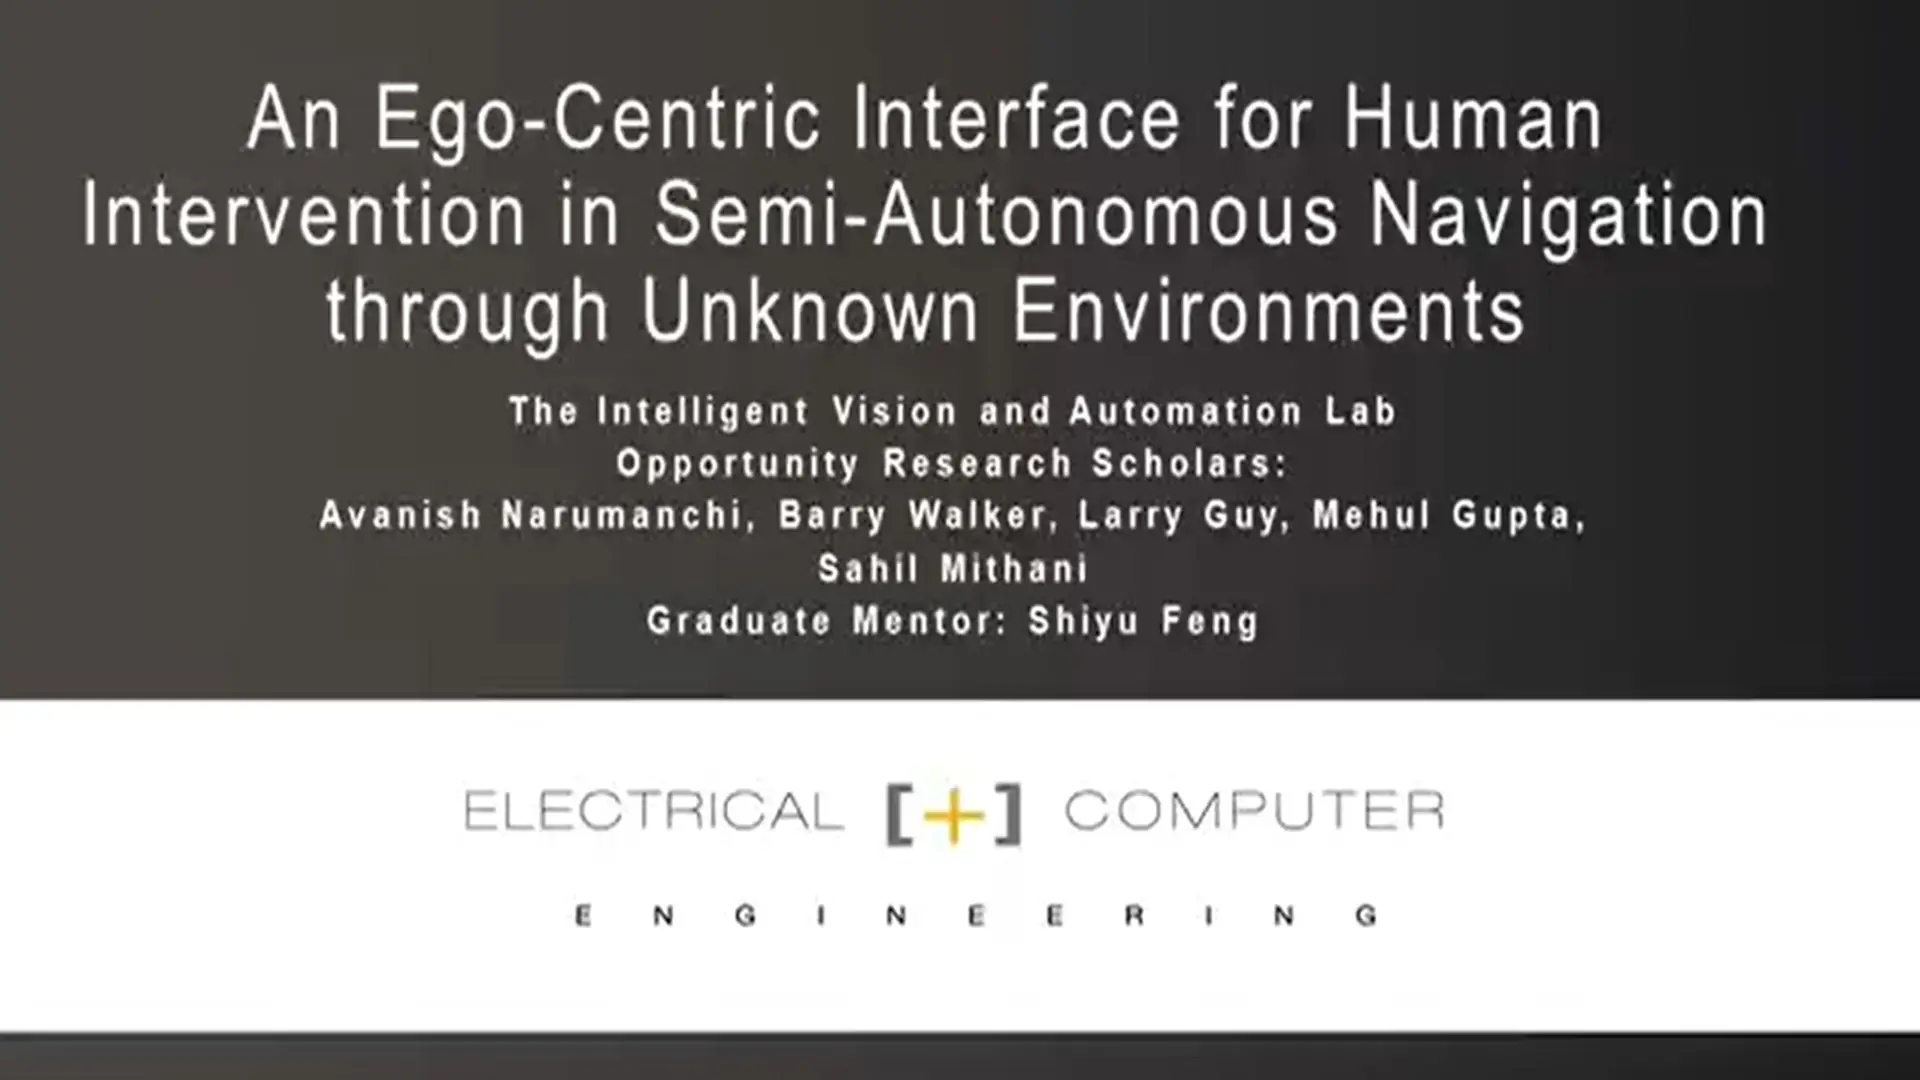 An Ego-Centric Interface for Human Intervention in Semi-Autonomous Navigation through Unknown Environments